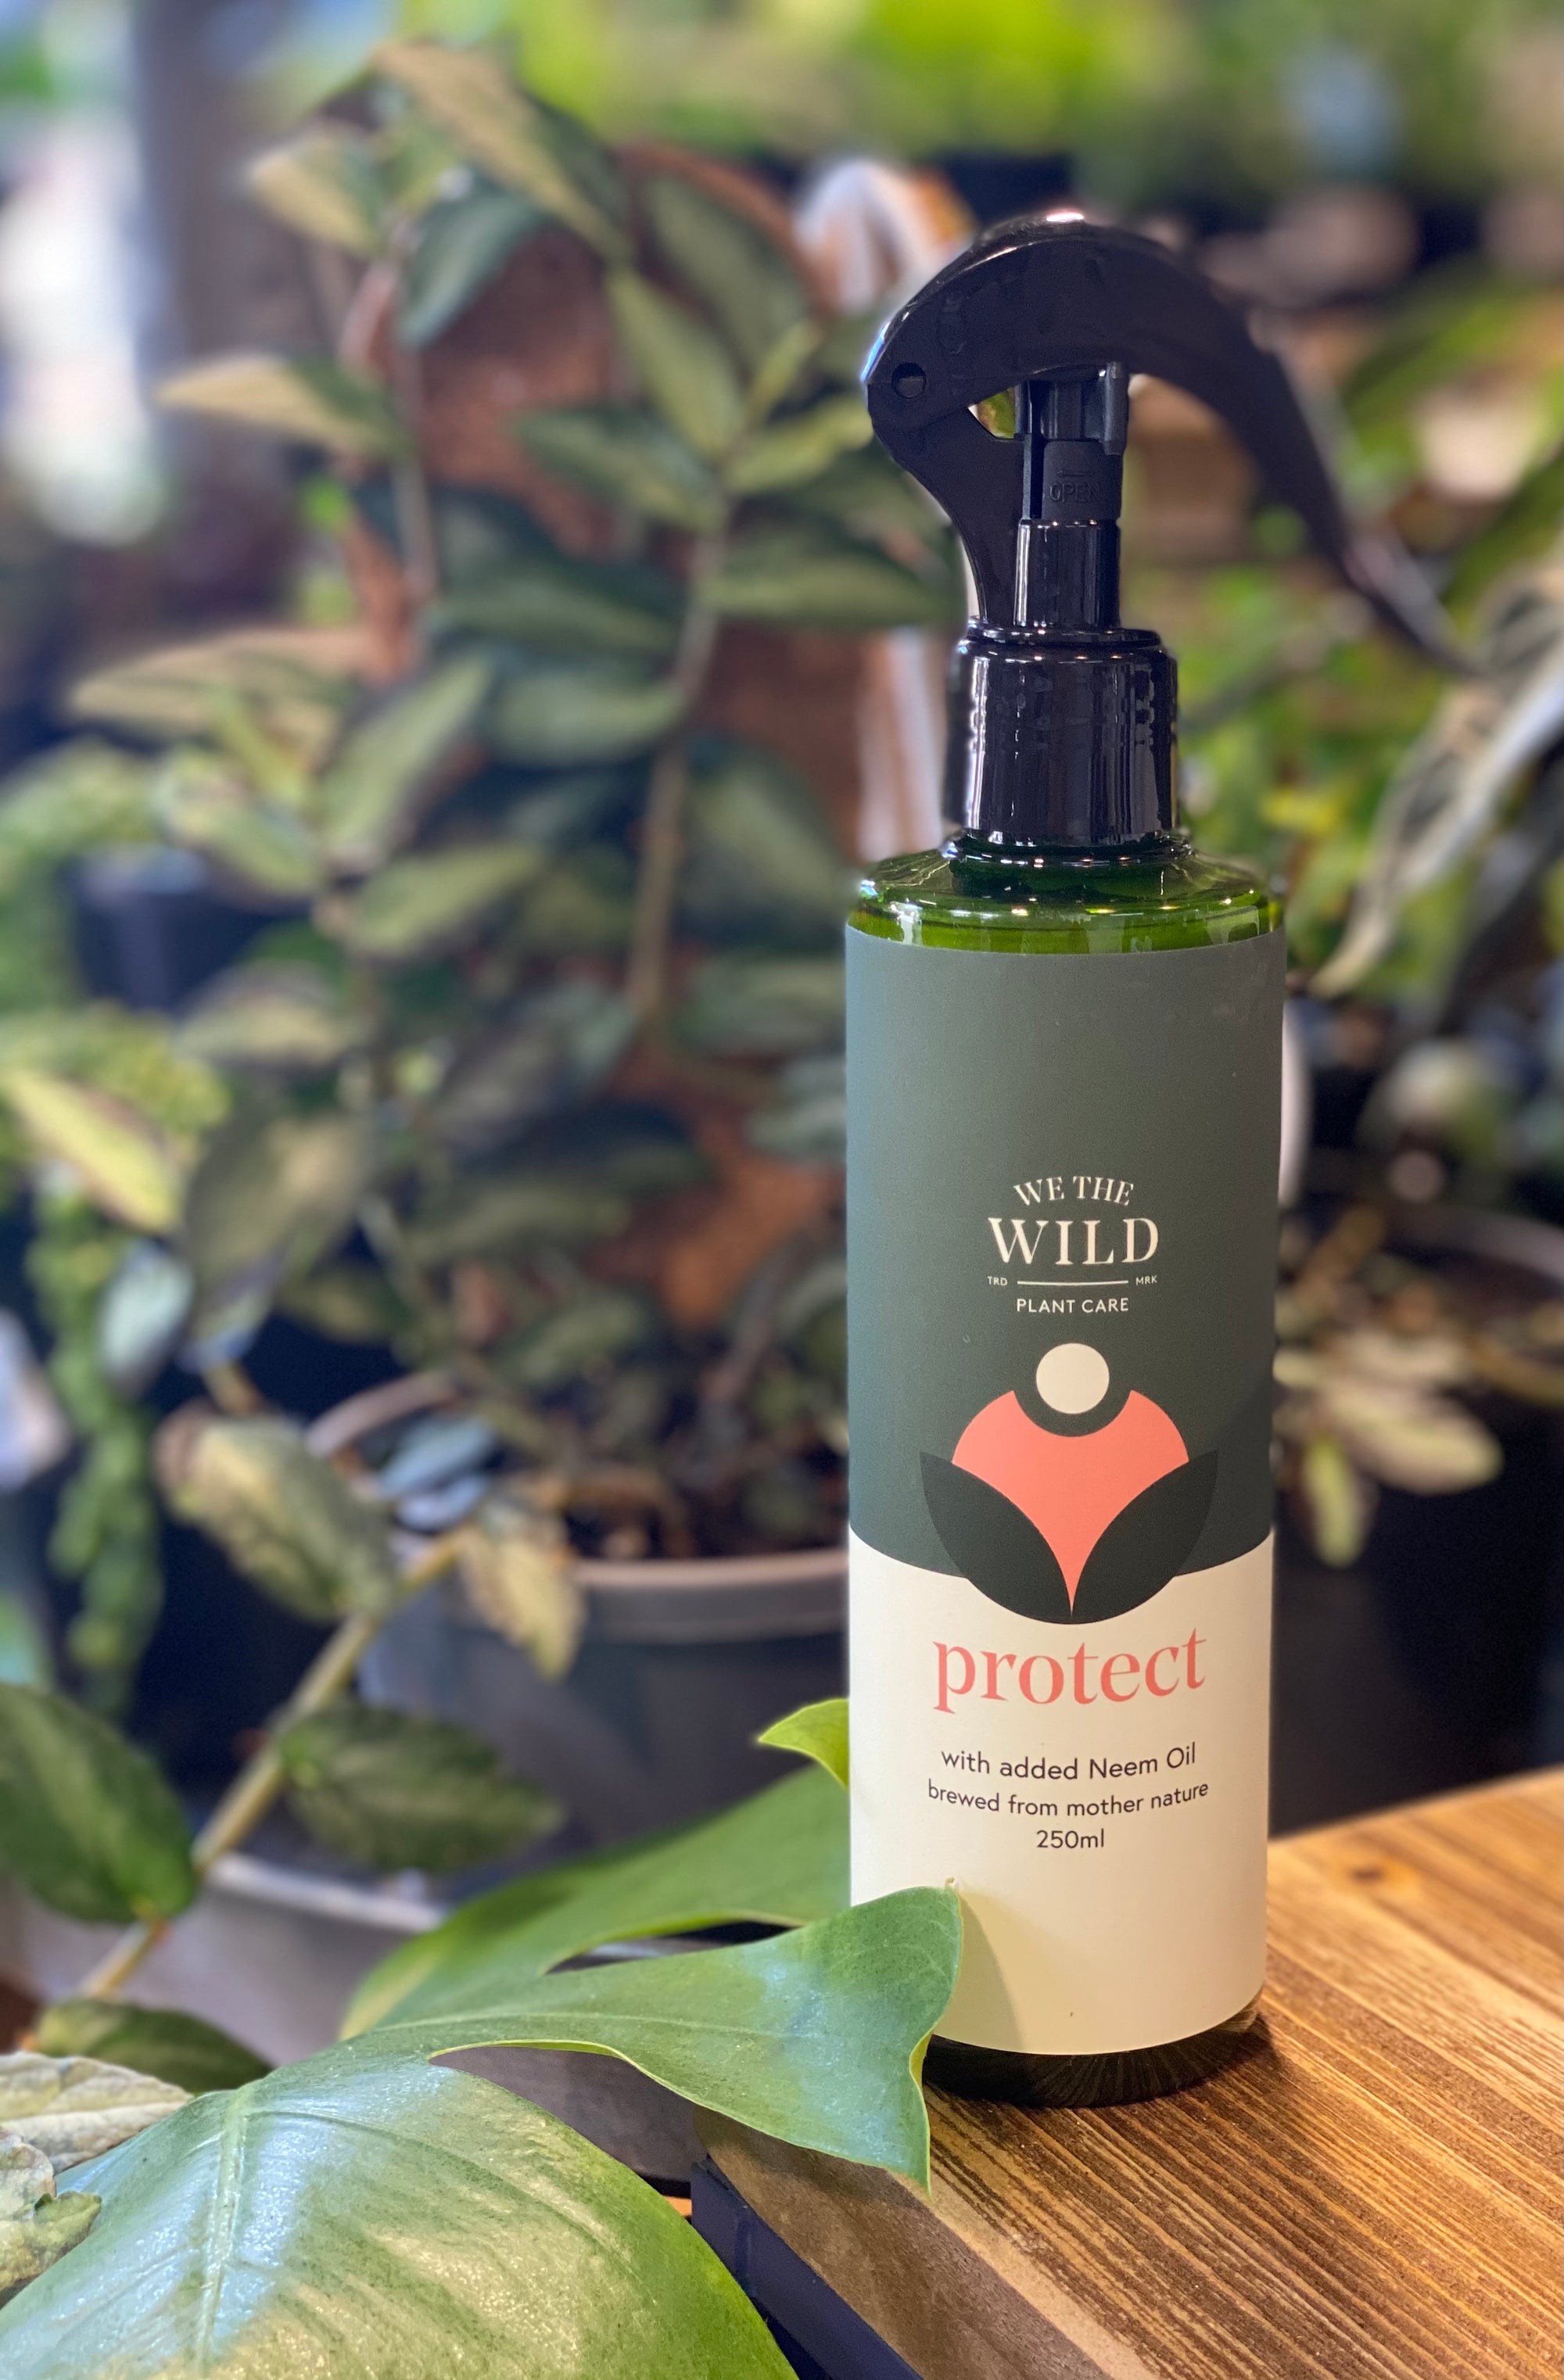 We the wild - protect neem oil